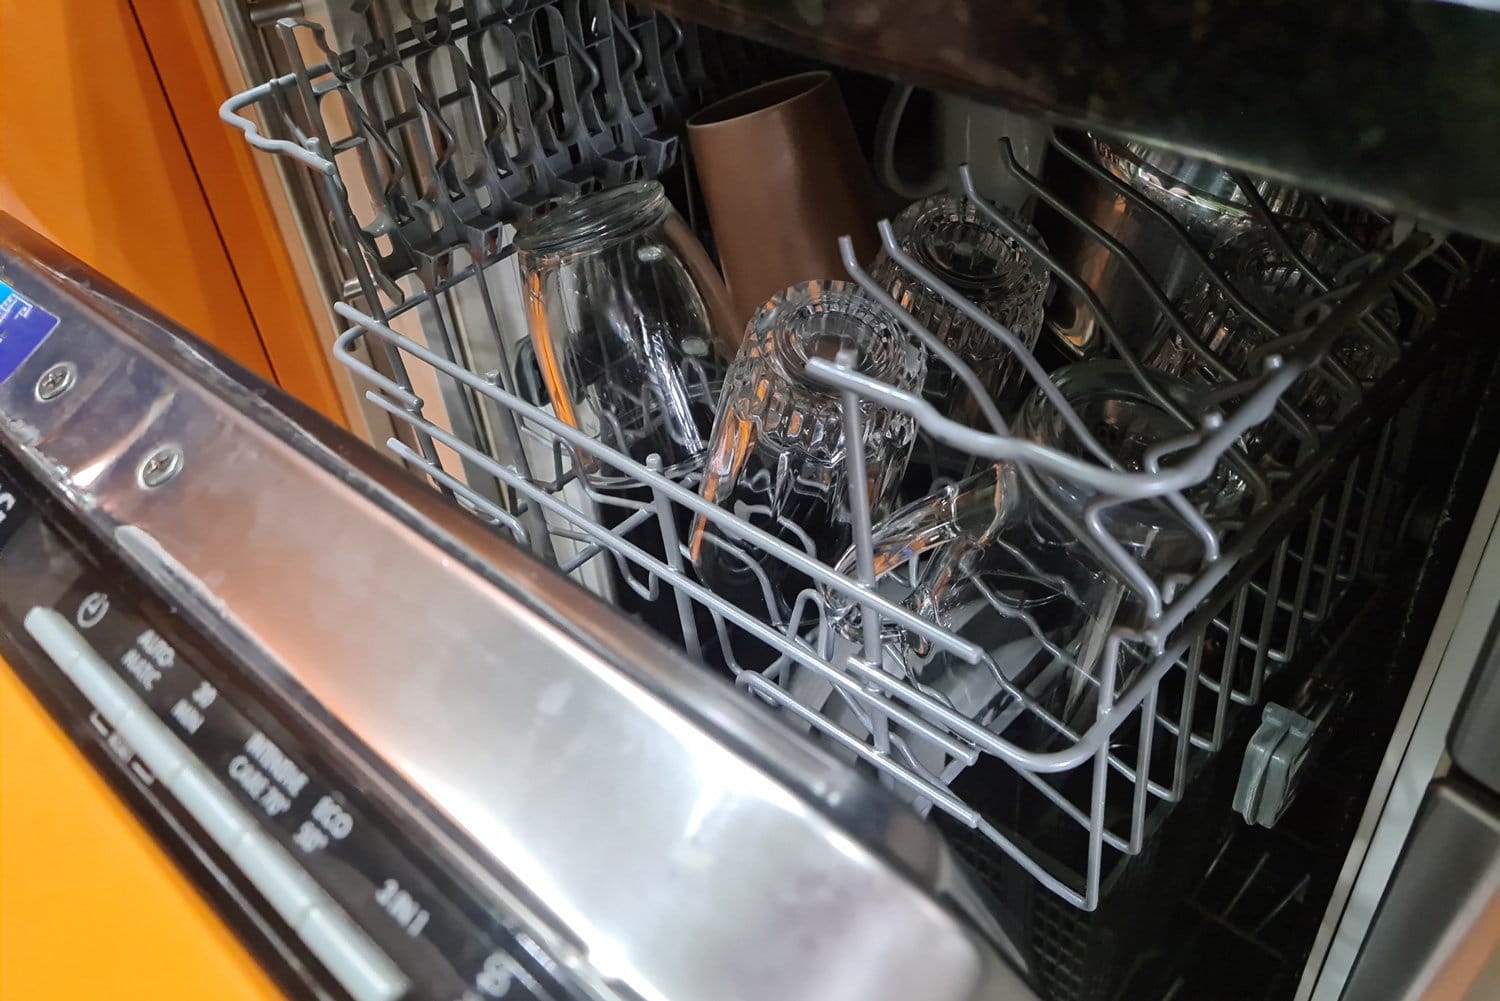 loseup of open dishwasher with clean glasses and dishes. Washing dishes and household appliances concept